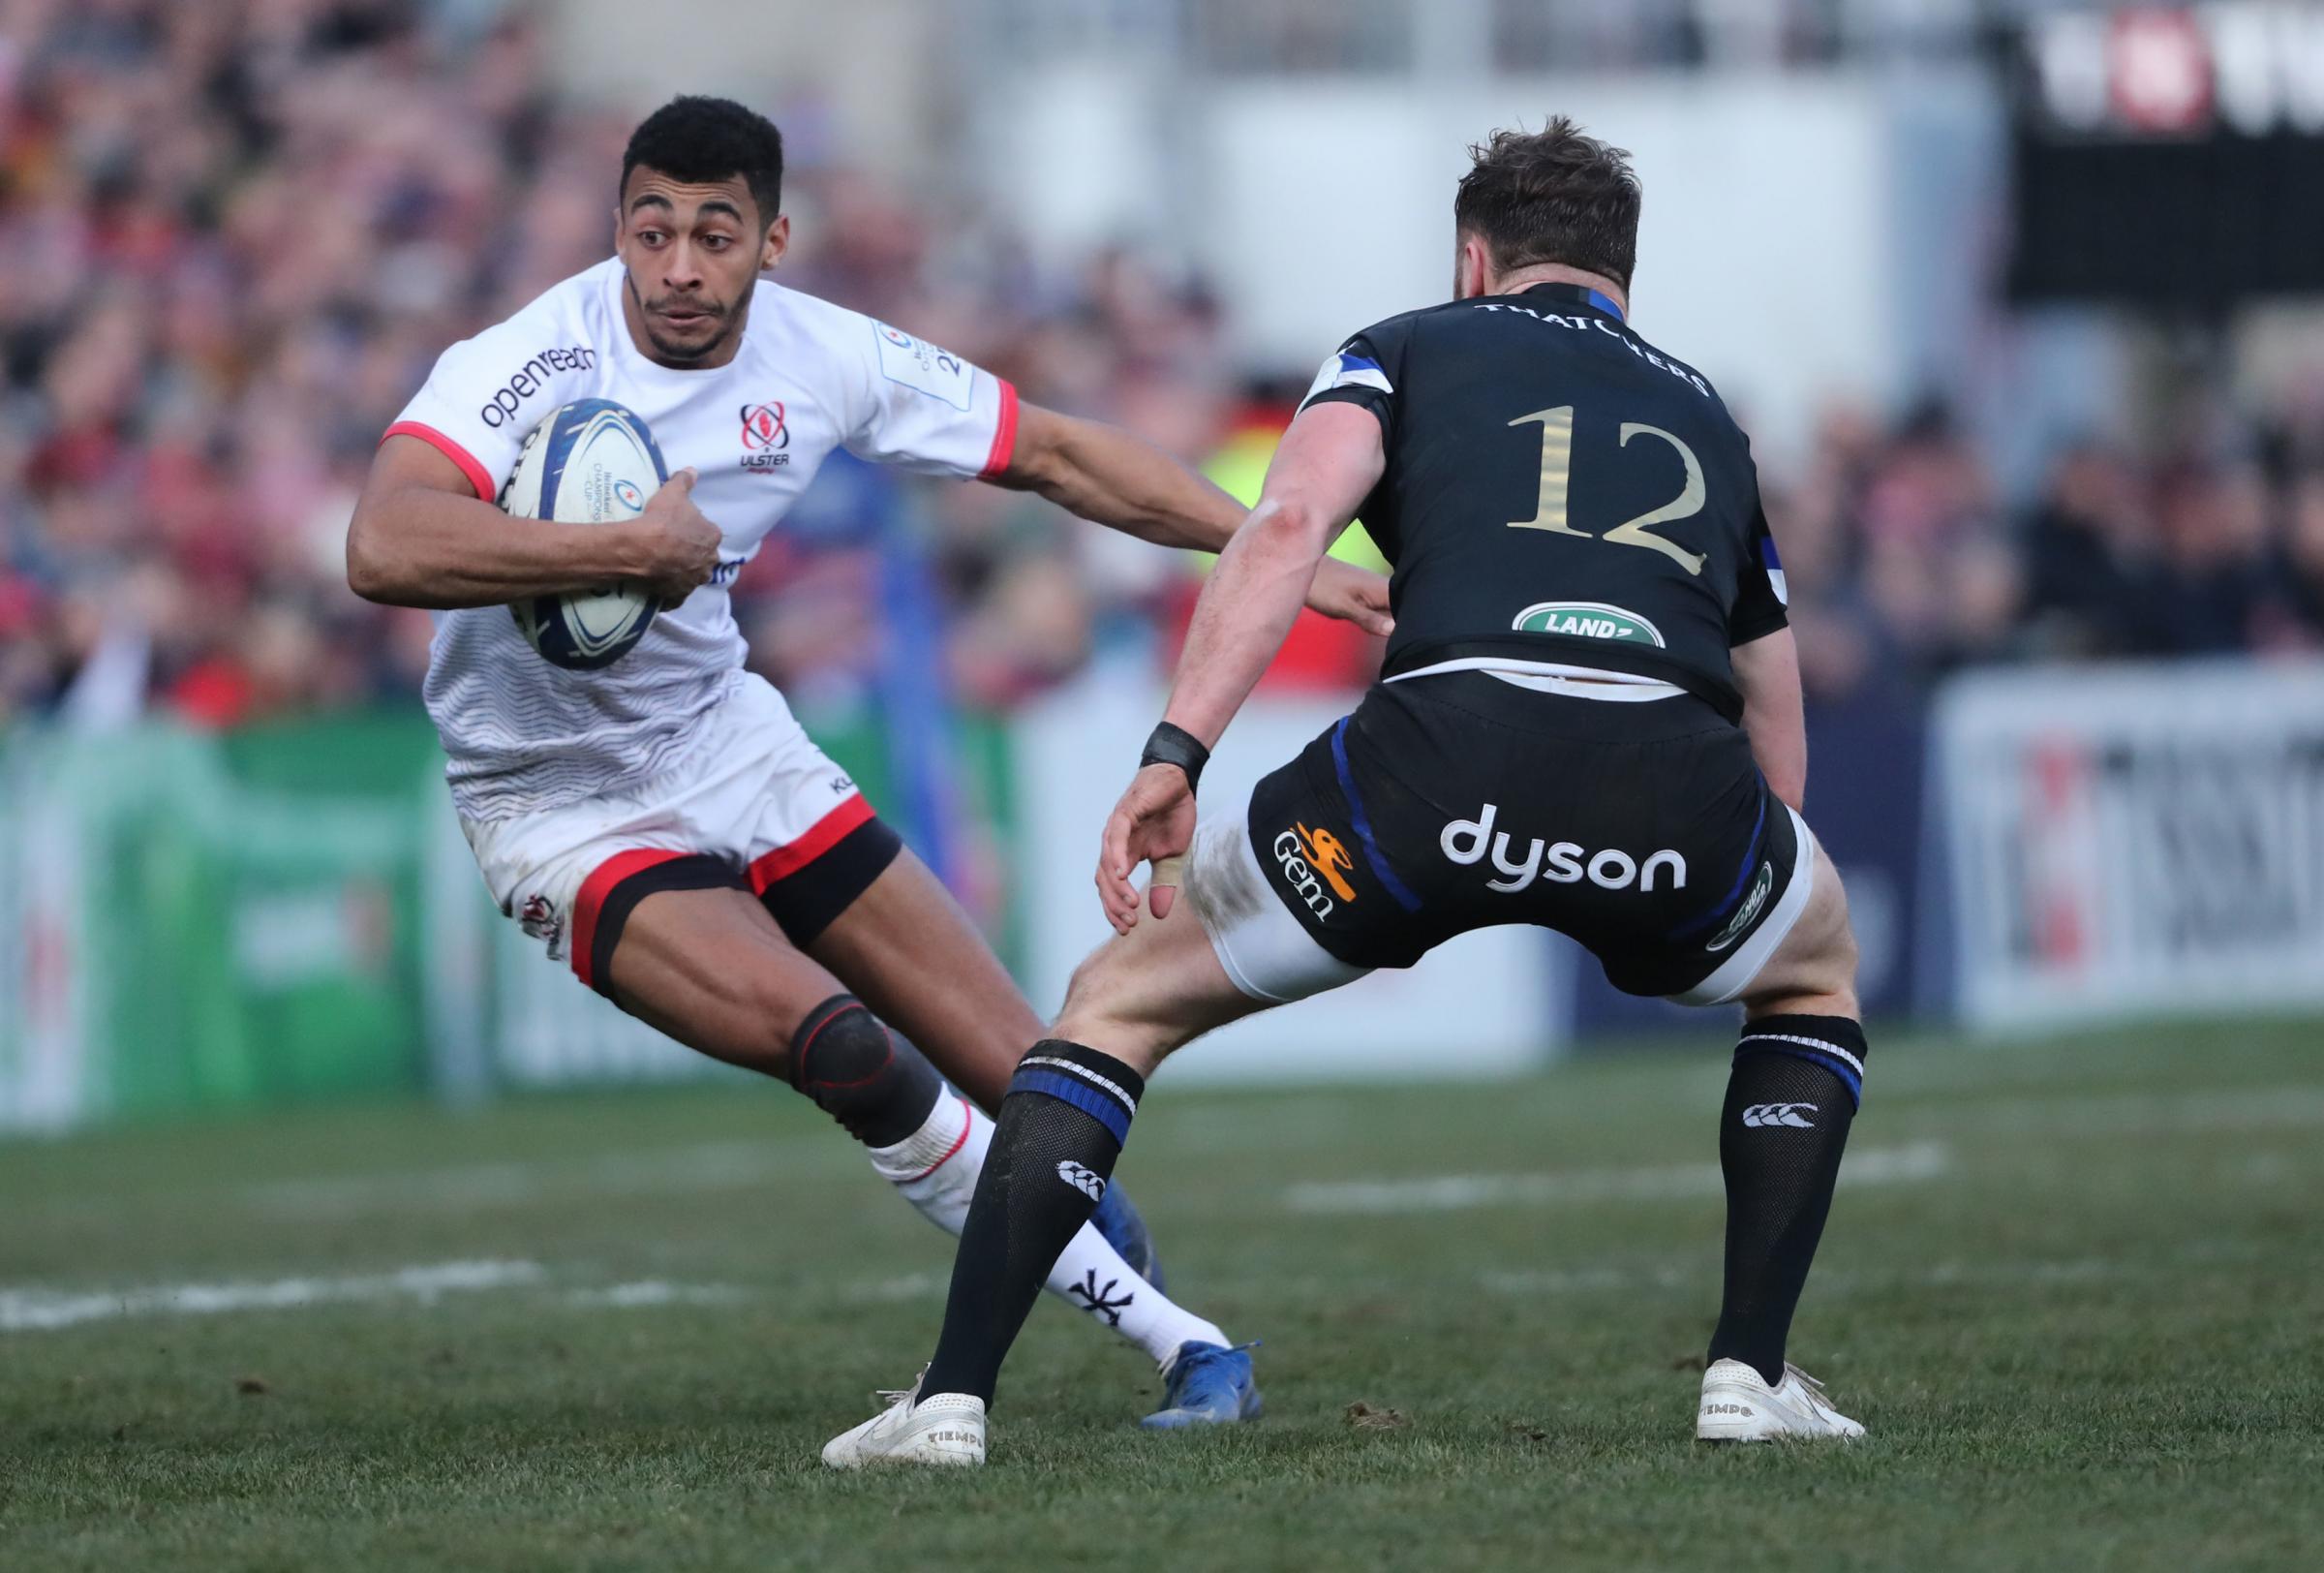 Baloucoune keen to continue rise when rugby restarts | Impartial ...